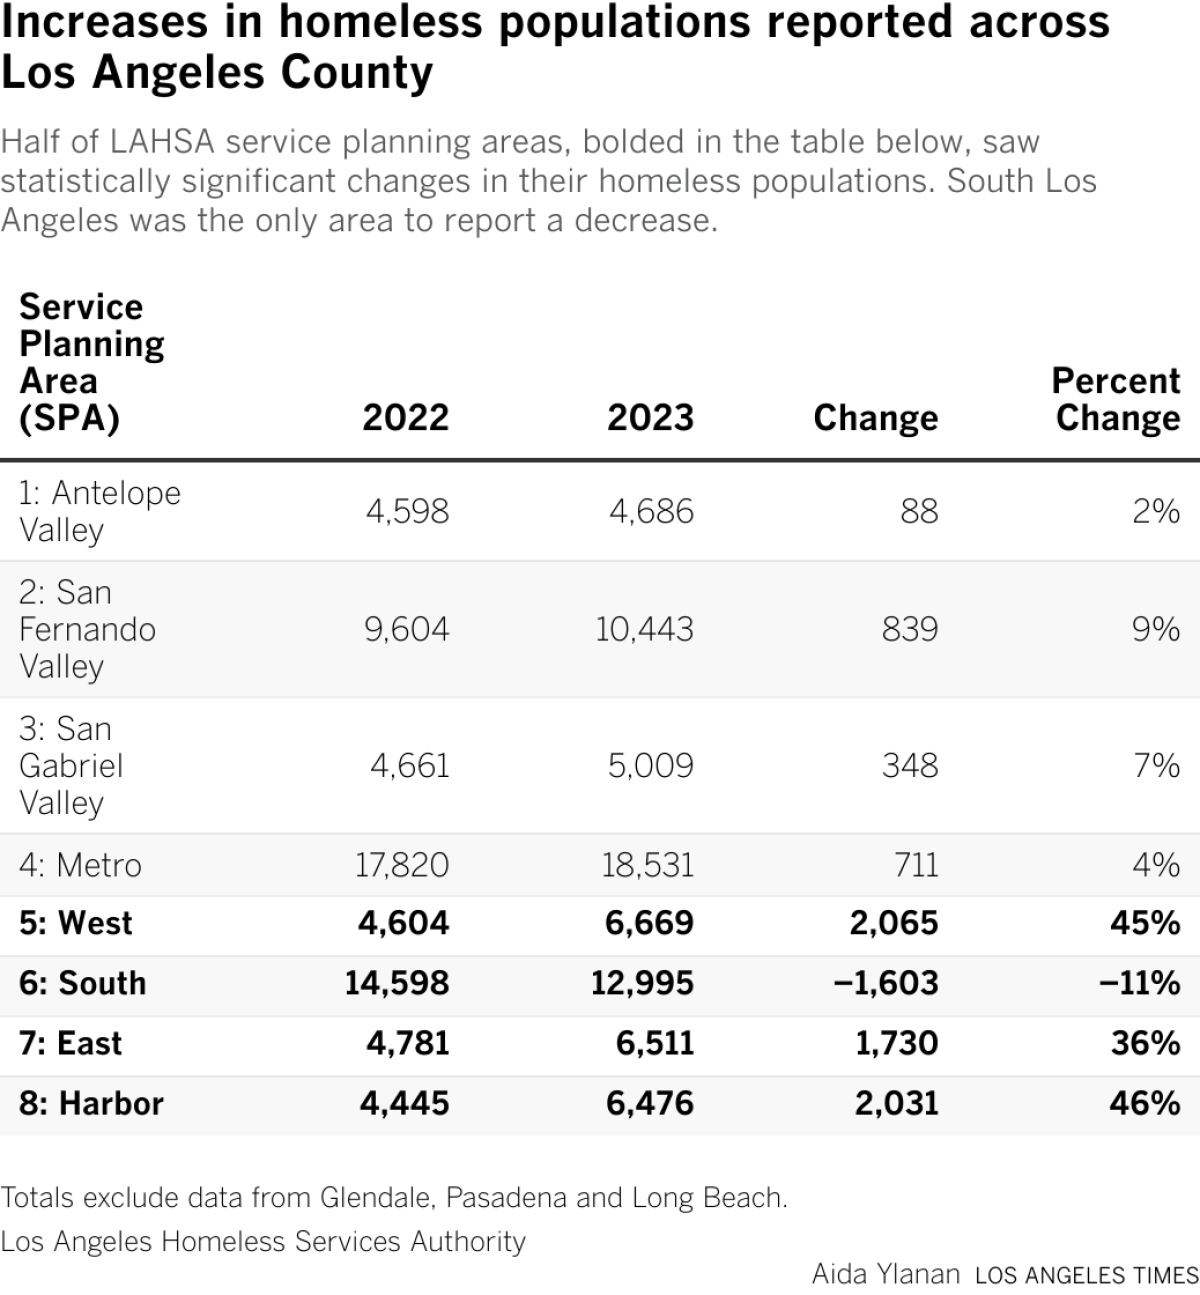 Half of LAHSA service planning areas, bolded in the table below, saw statistically significant changes in their homeless populations. South Los Angeles was the only area to report a decrease.